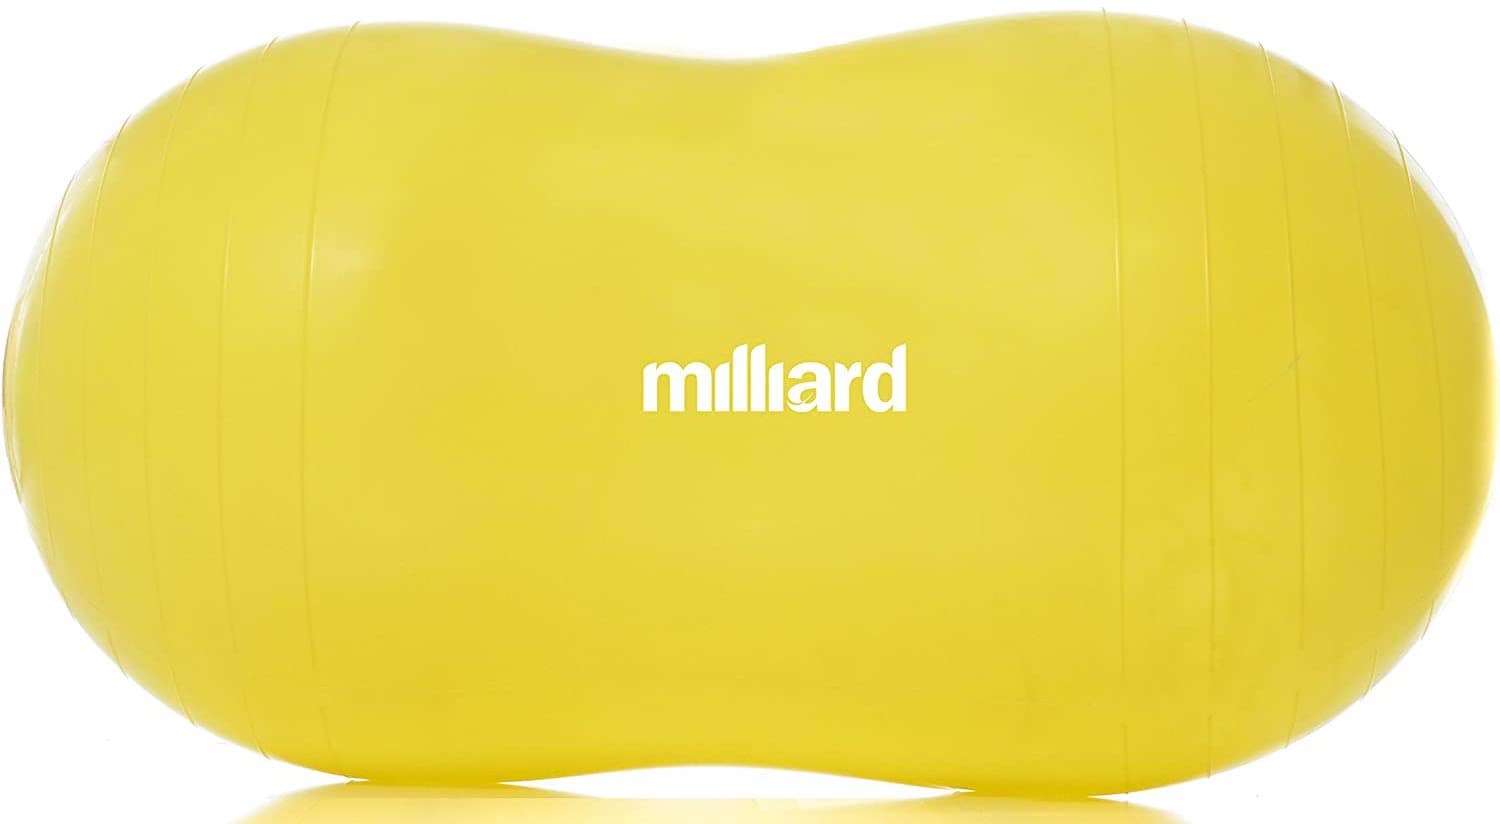 Milliard Peanut Ball Physio Roll for Exercise, Therapy, Labor, Birthing Training